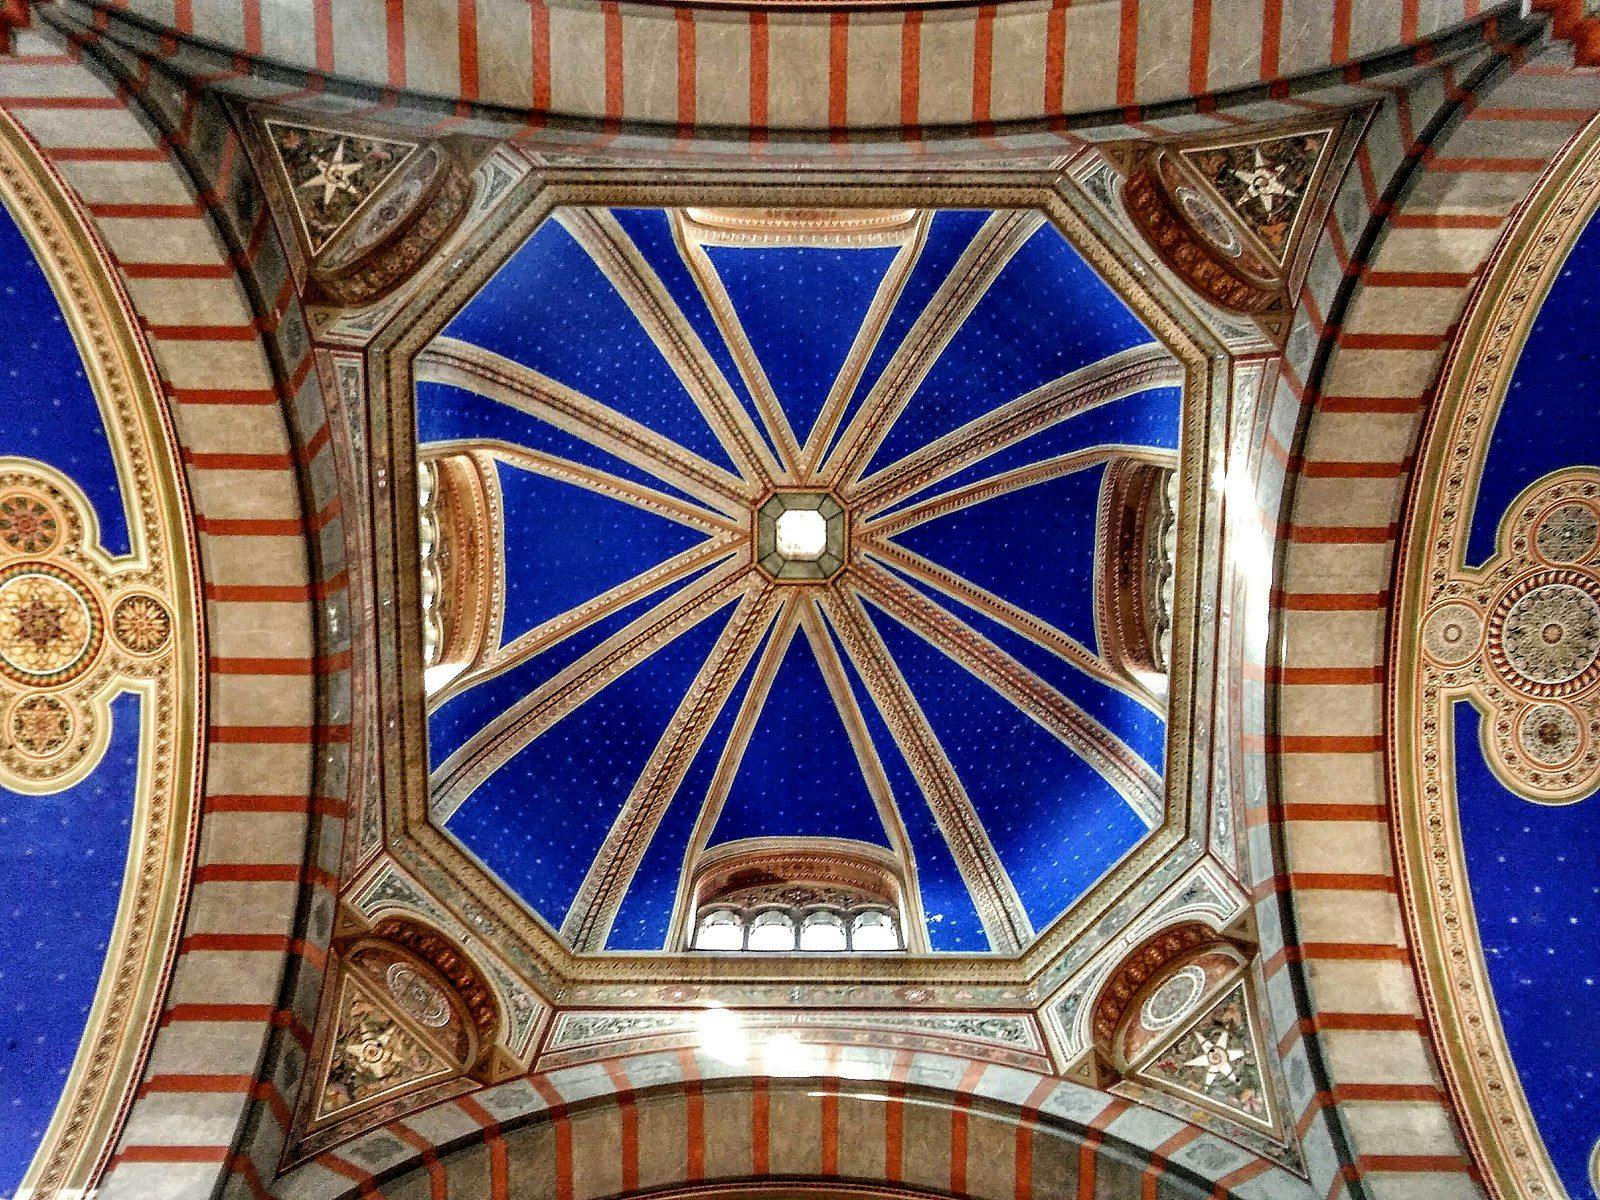 Famedio's ceiling (by Melancholia~itwiki, CC BY-SA 4.0 via Wikimedia Commons)